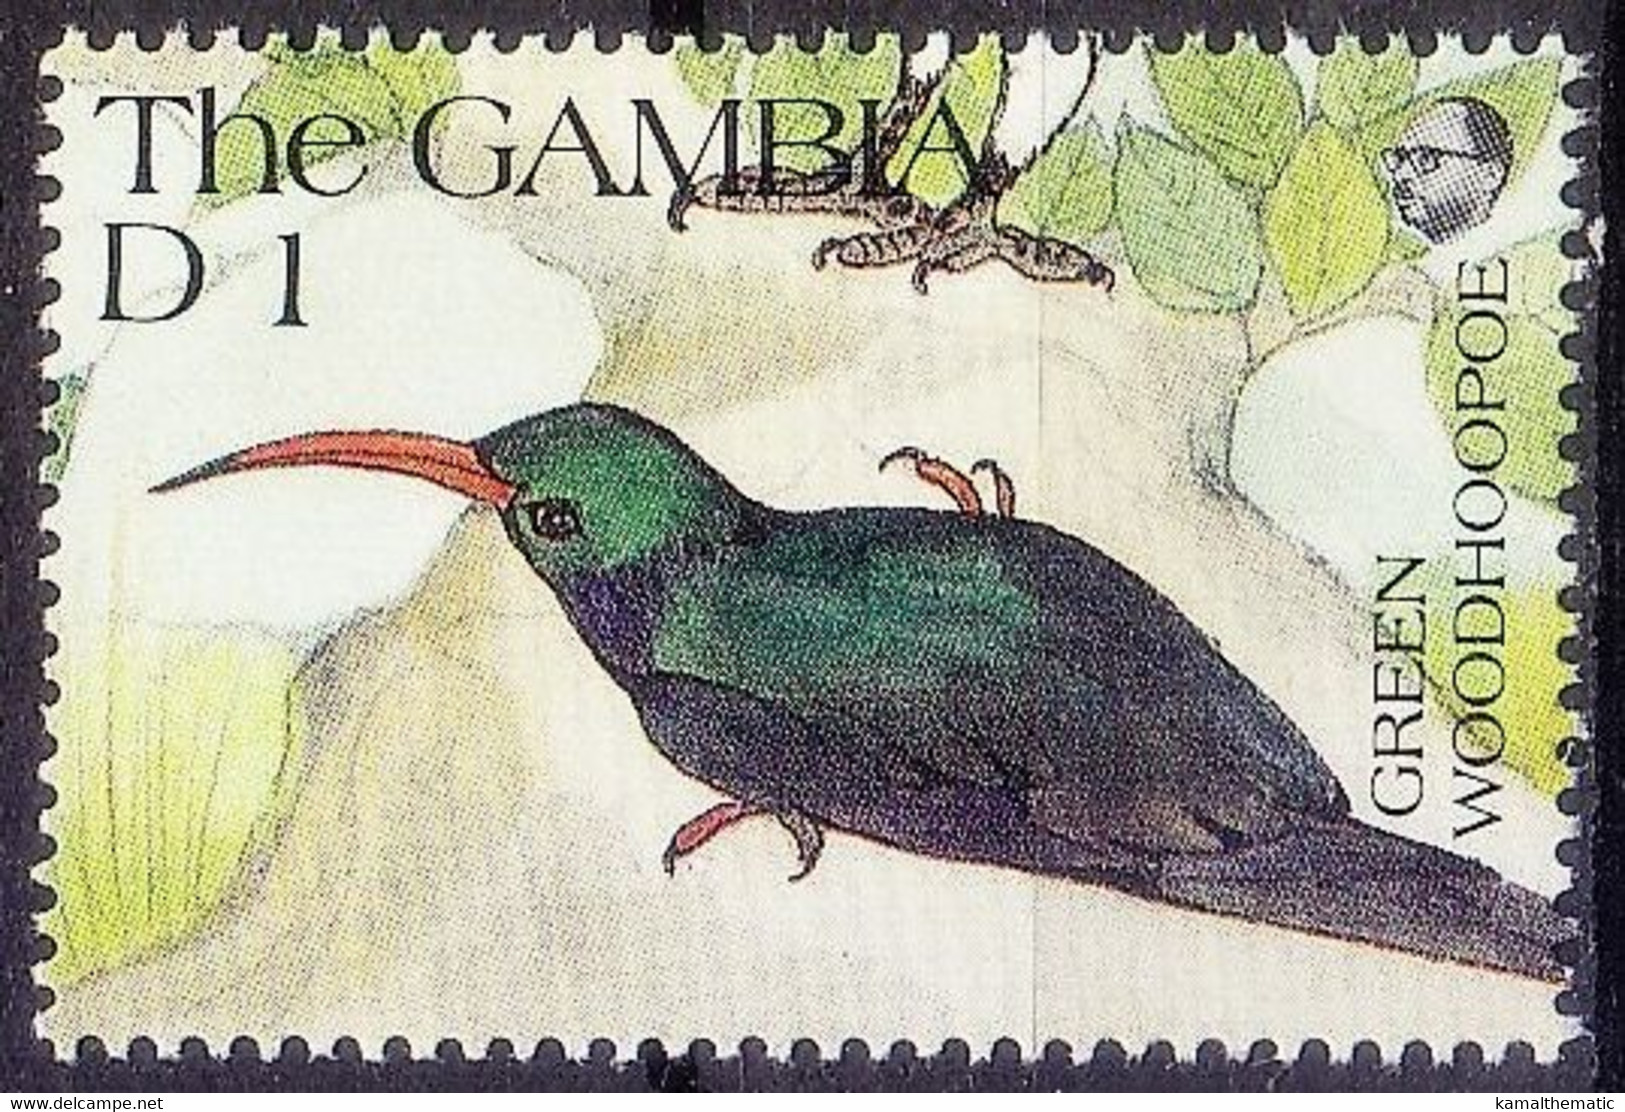 Golden-tailed Woodpecker, Birds, Gambia 1991 MNH - Coucous, Touracos